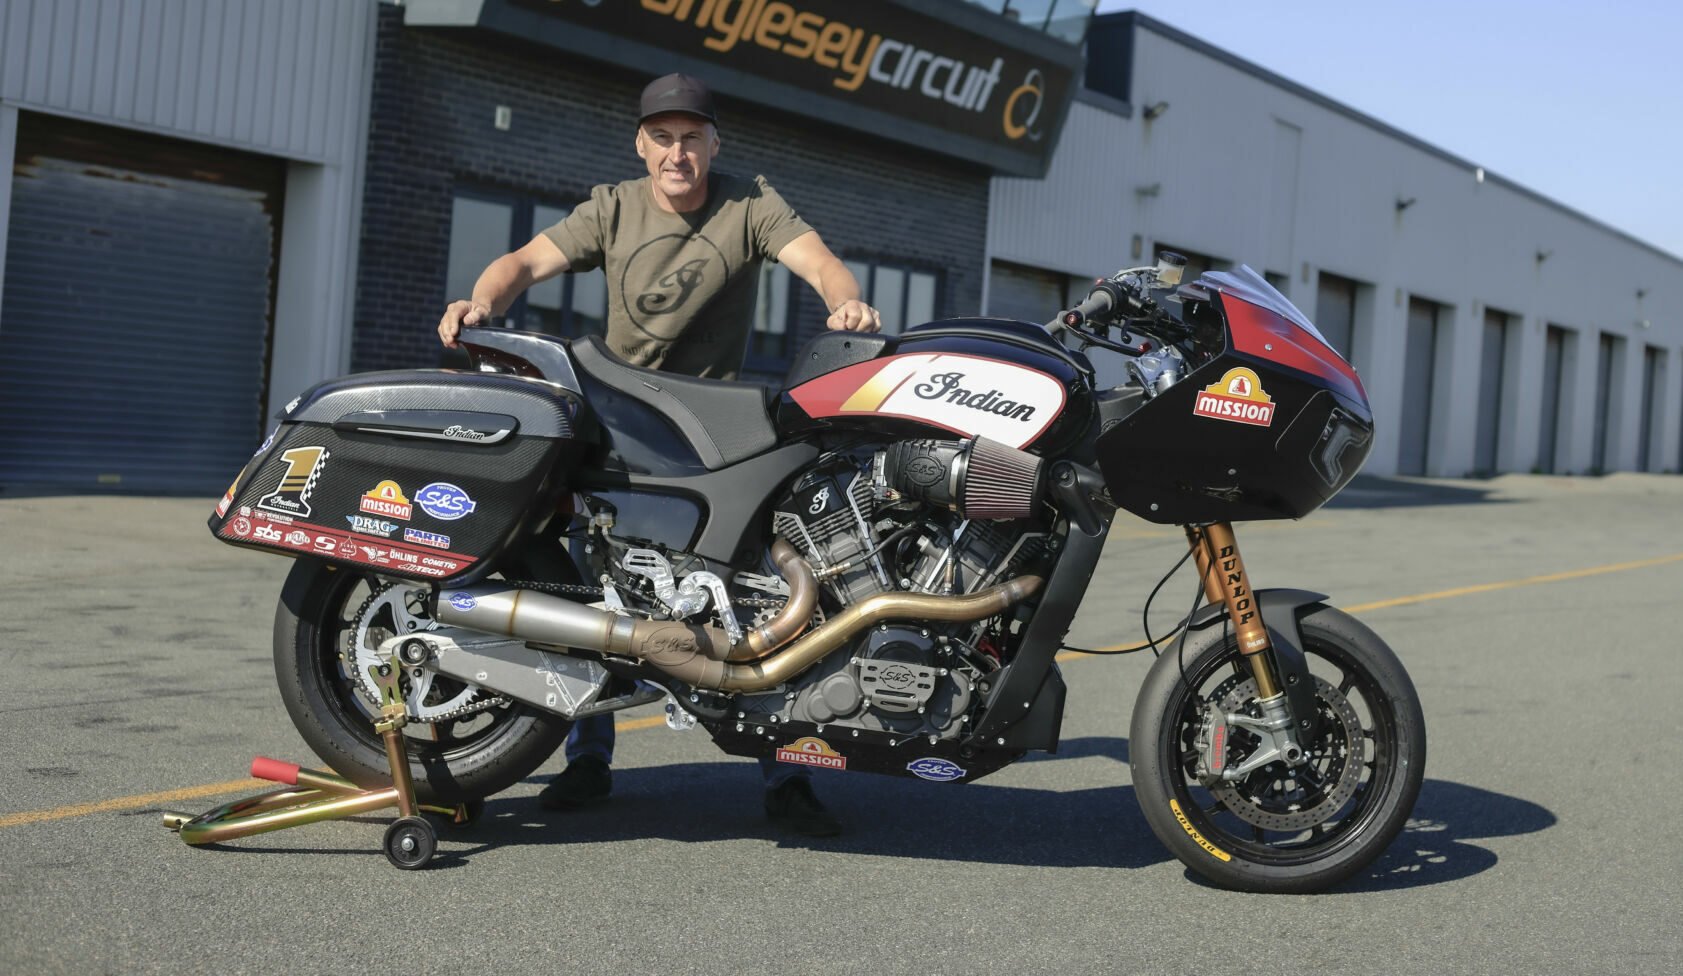 Jeremy McWilliams and an Indian Challenger RR racer-replica. Photo courtesy Indian Motorcycle.